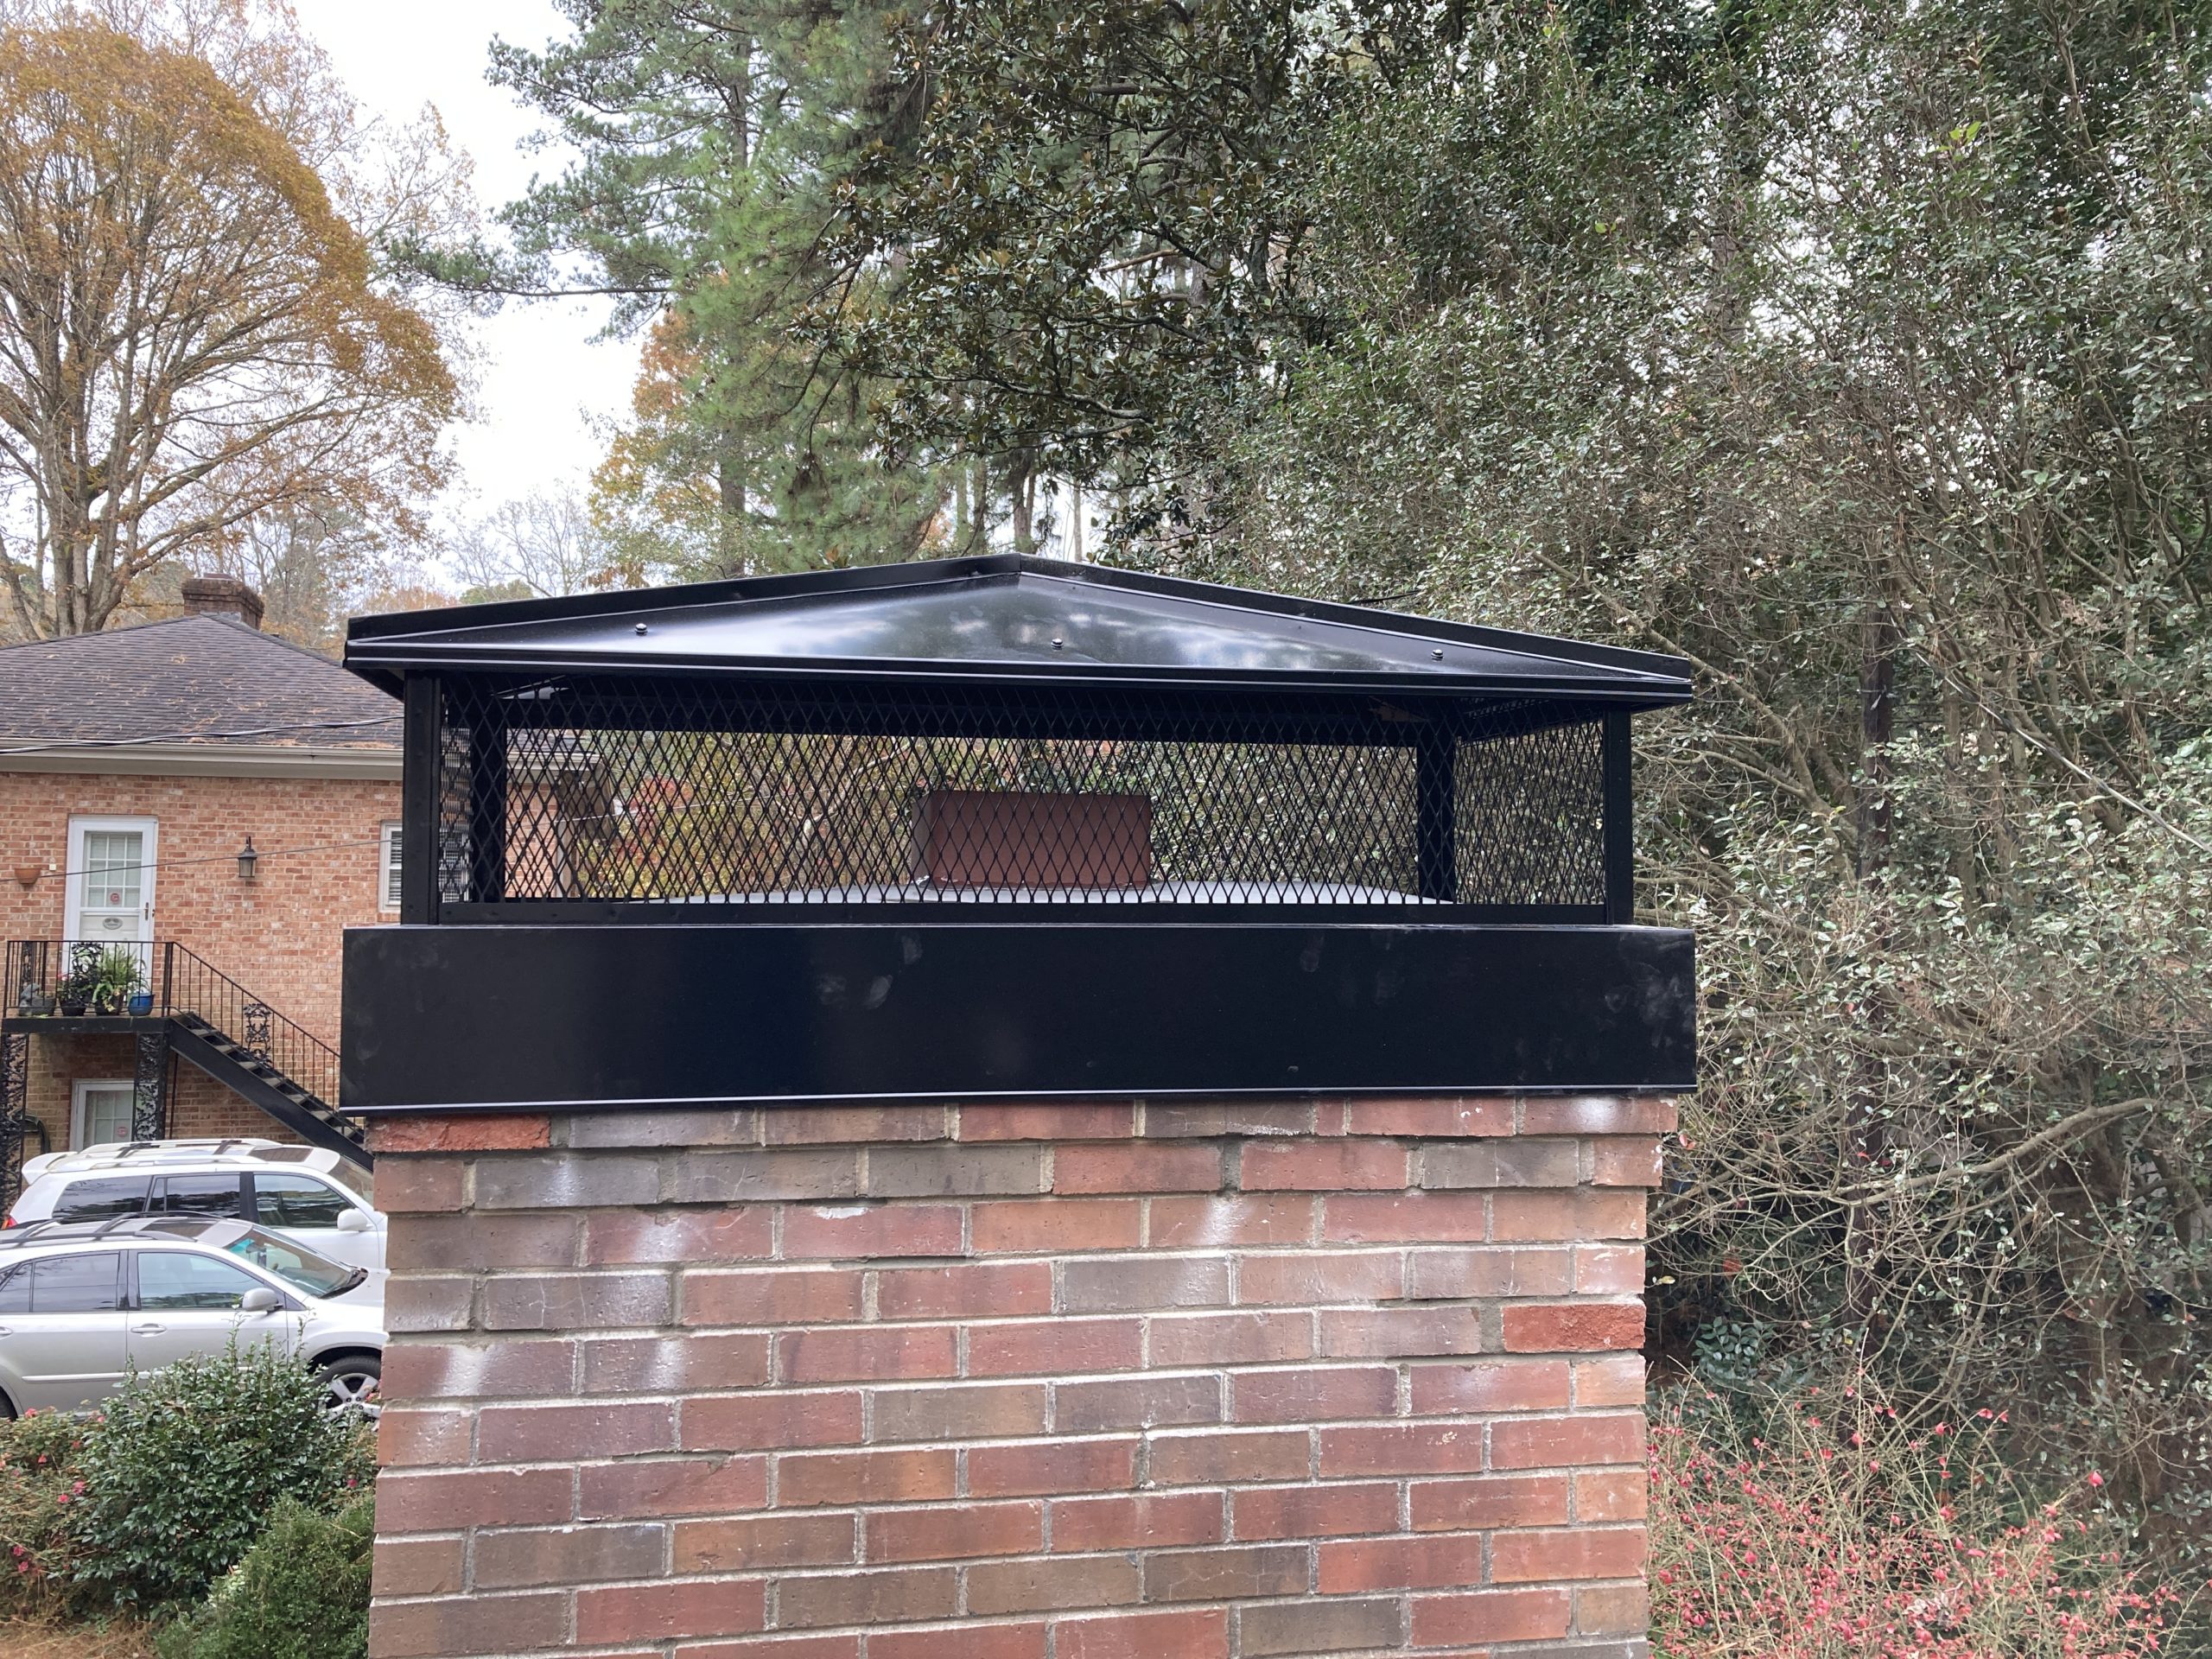 Brick Chimney after new, larger black metal chimney cap, with screen and chase cover installation